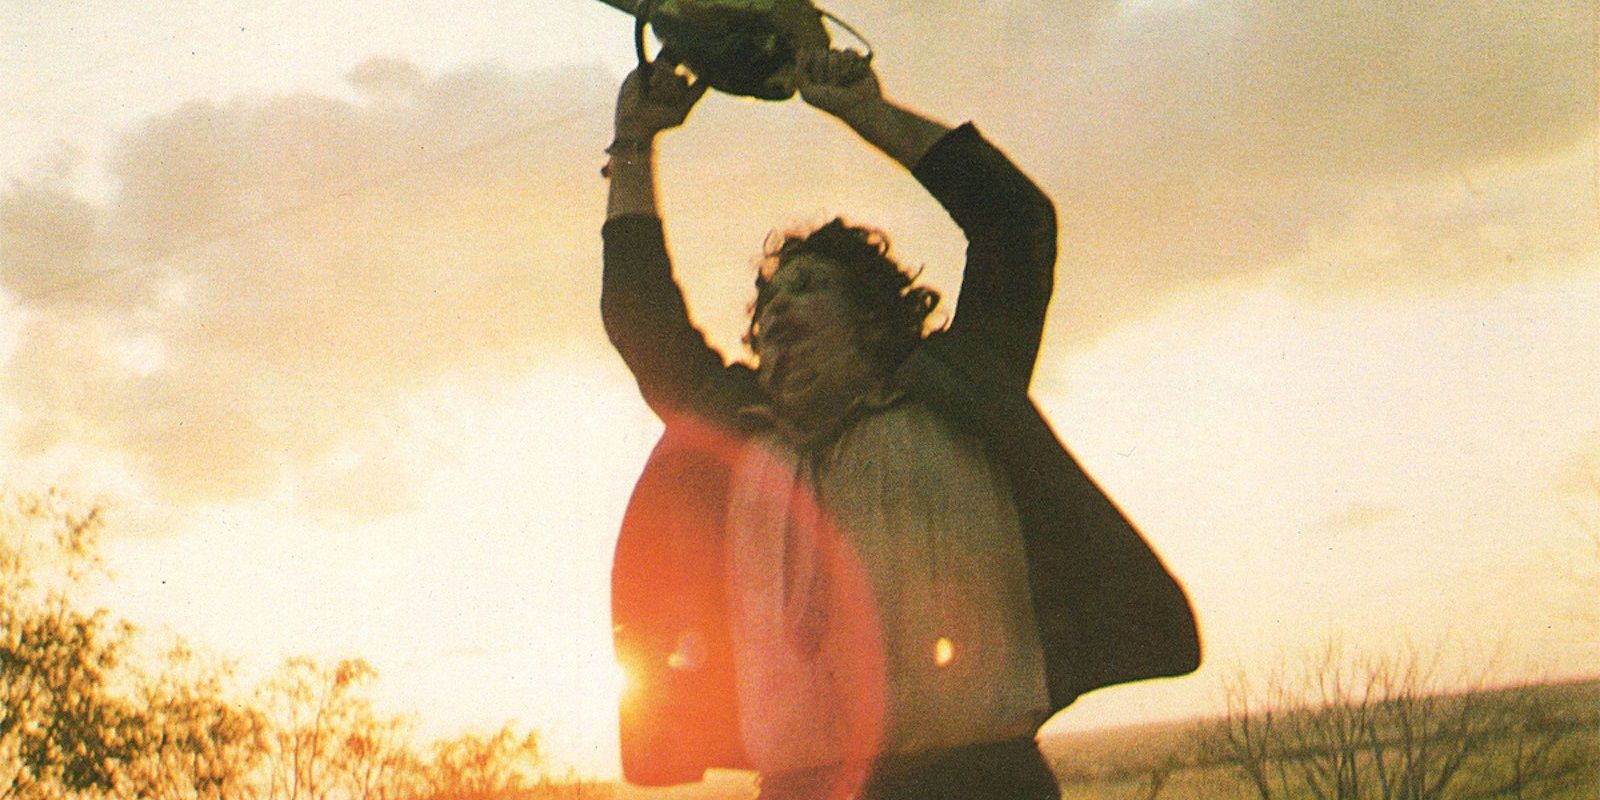 Leatherface waving his chainsaw around at the end of The Texas Chain Saw Massacre